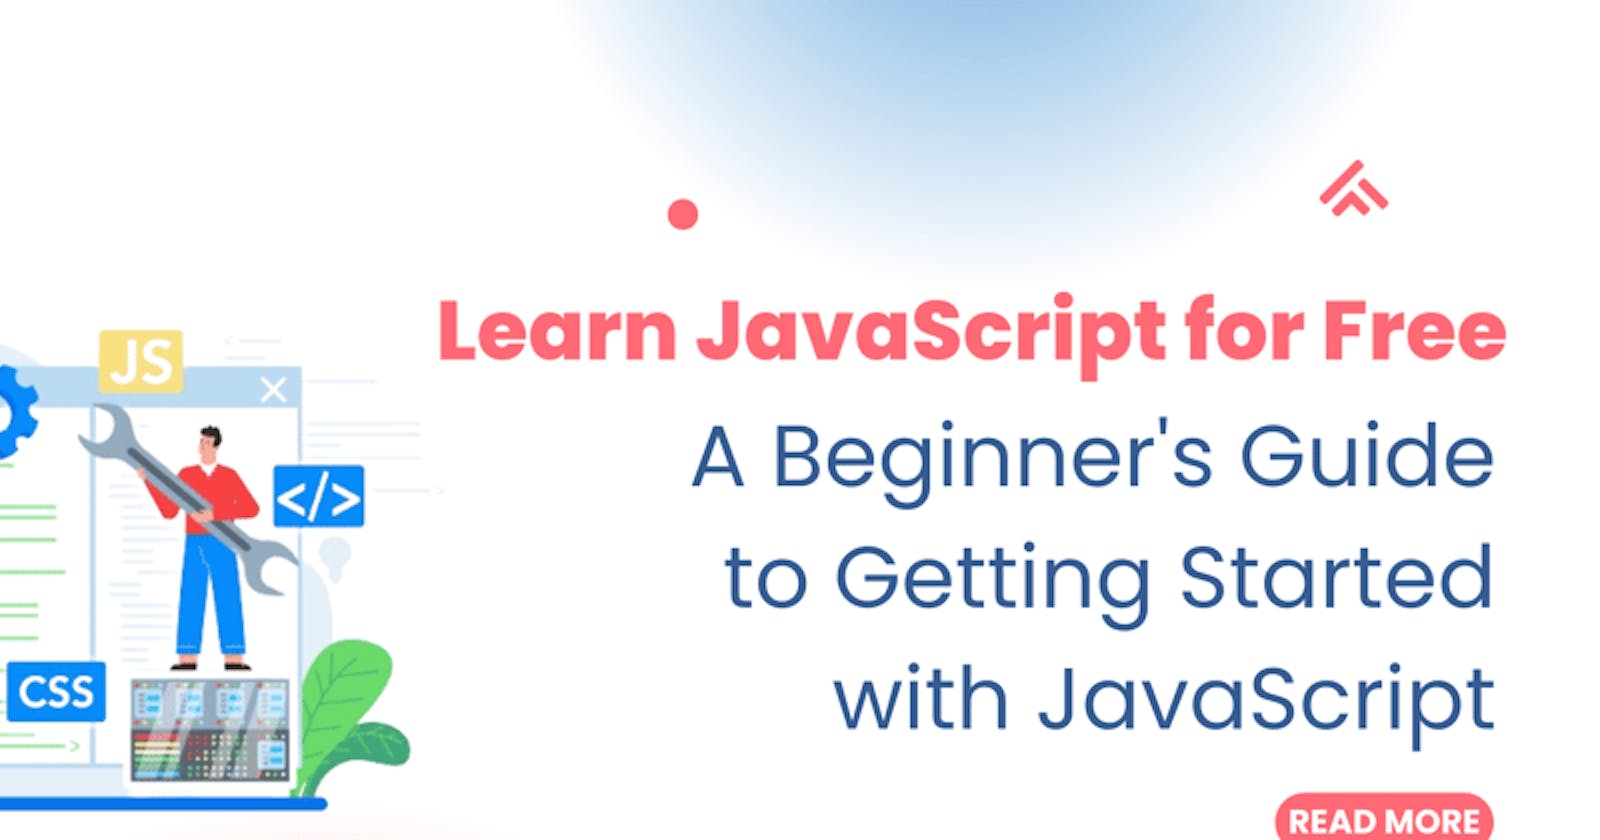 Learn JavaScript for Free: A Beginner's Guide to Getting Started with JavaScript